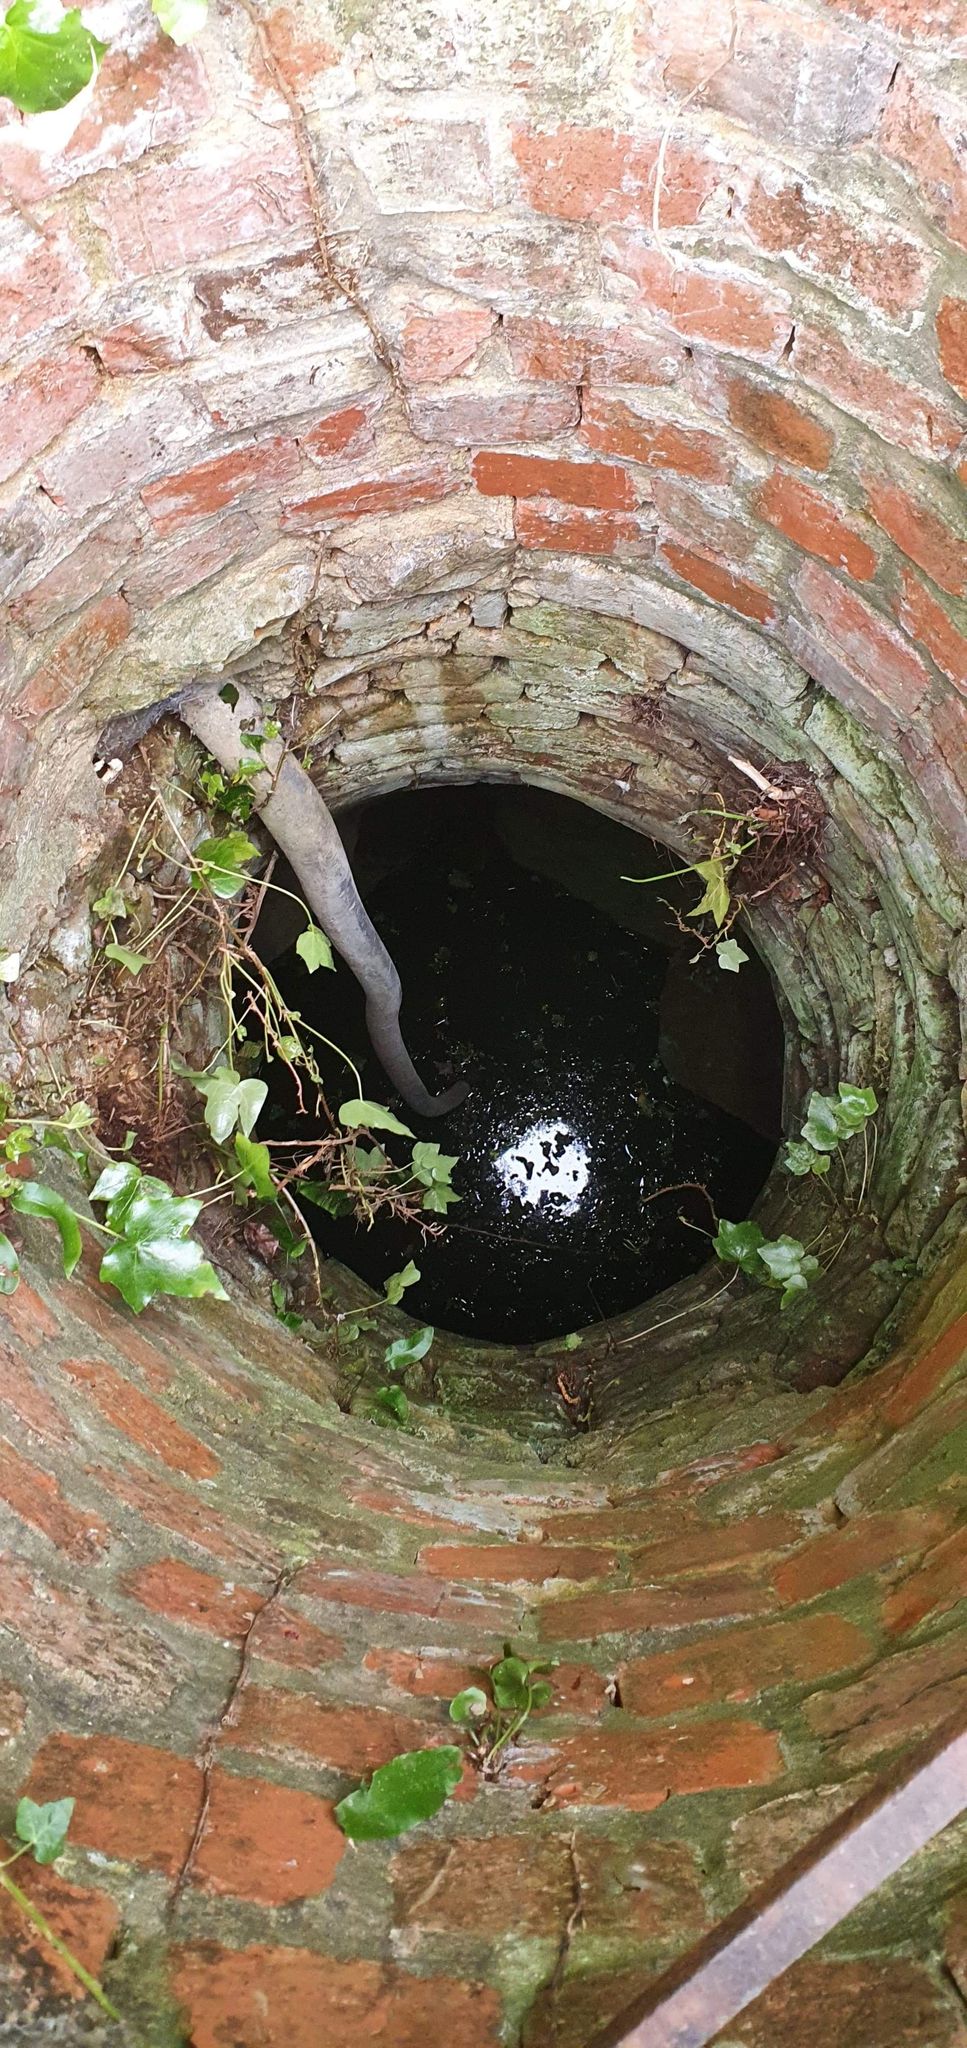 The well down which Flea was stuck